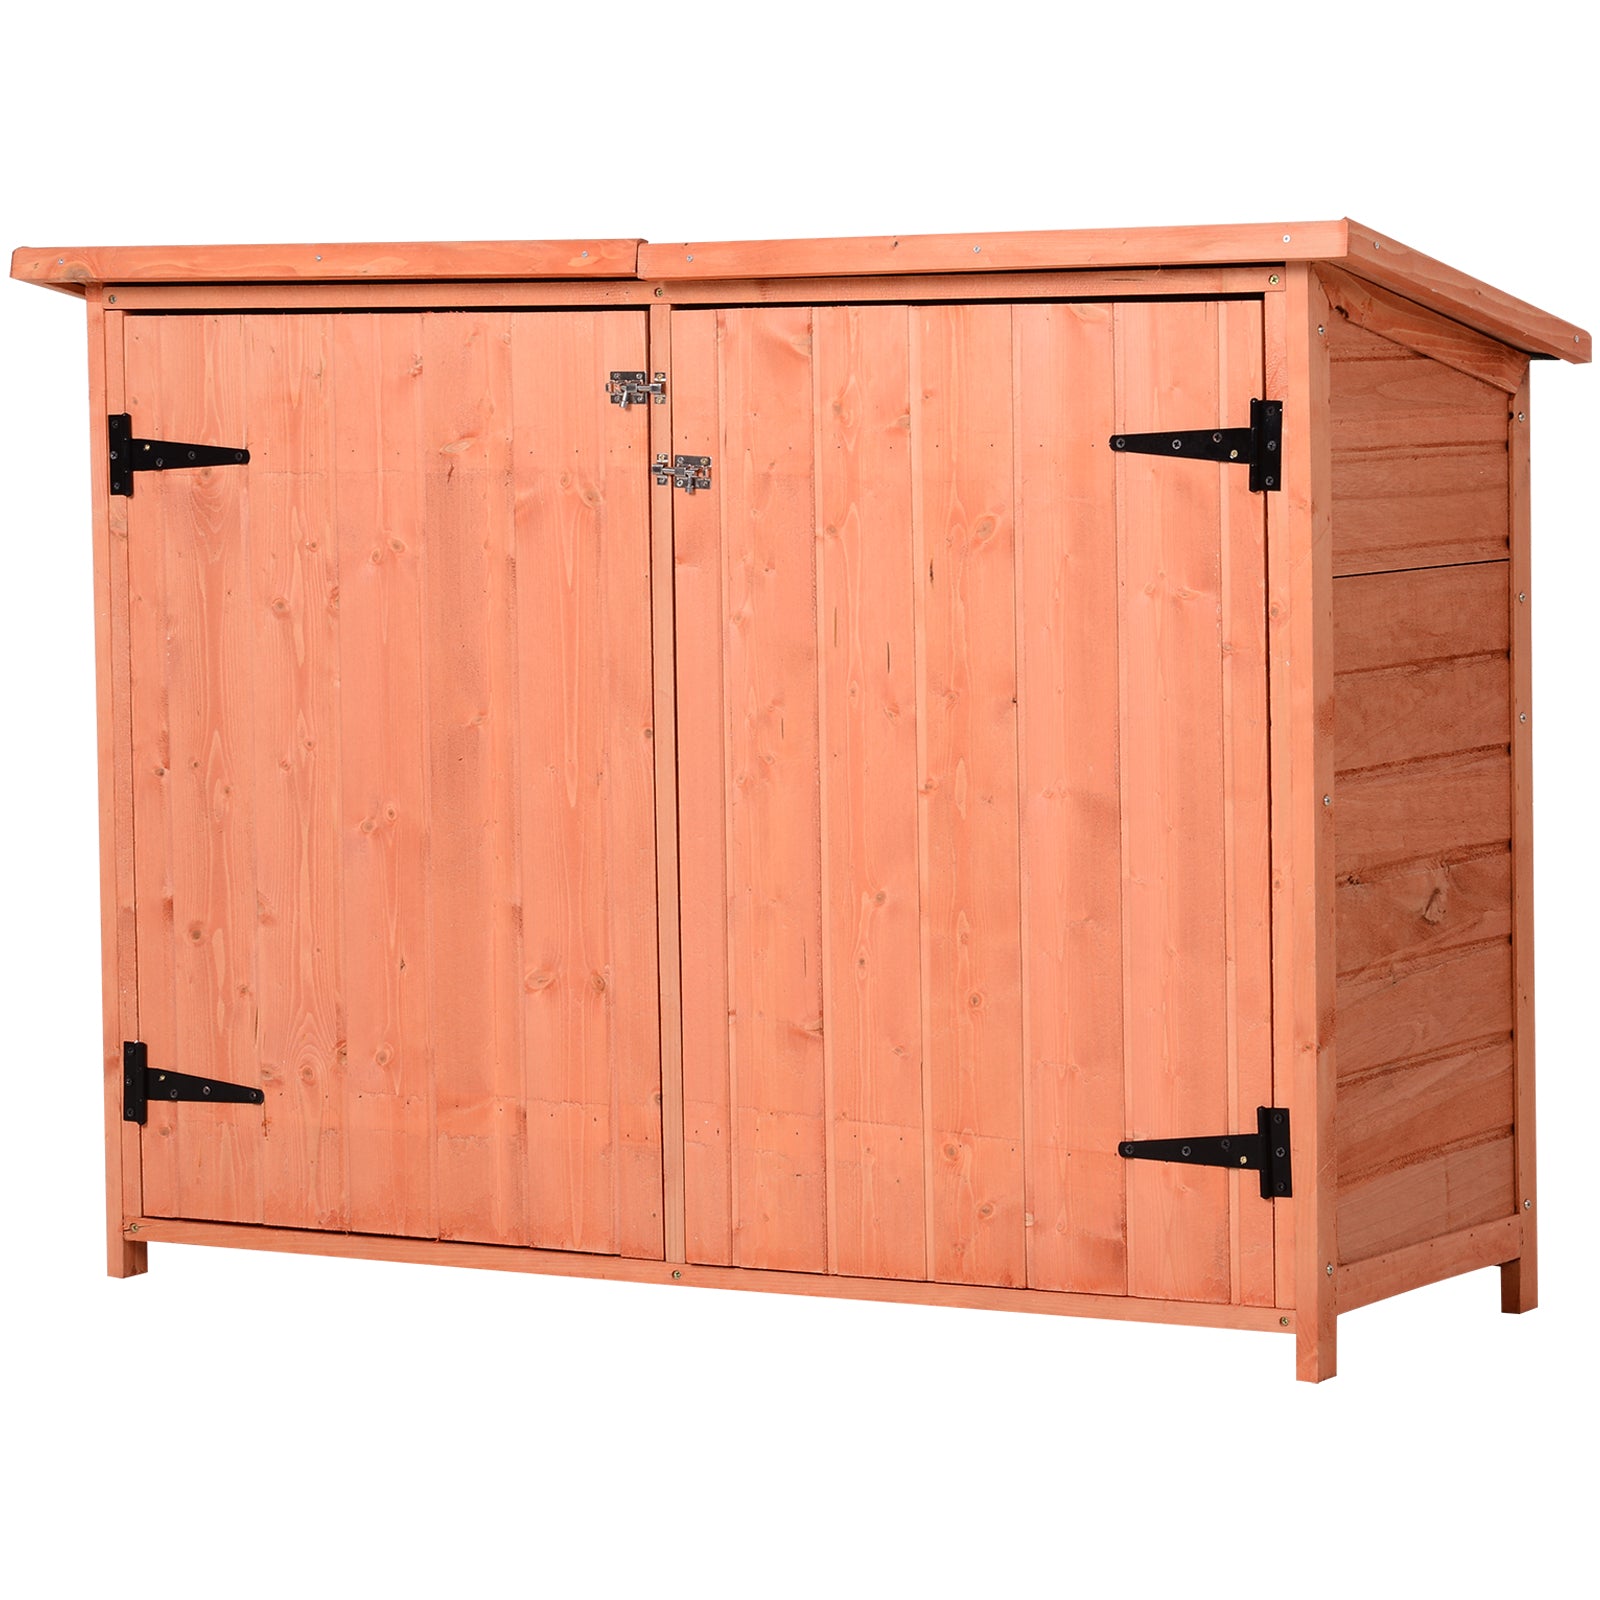 Outsunny Low Wide Wood Garden Shed Outdoor Storage w/ 2 Shelves  | TJ Hughes